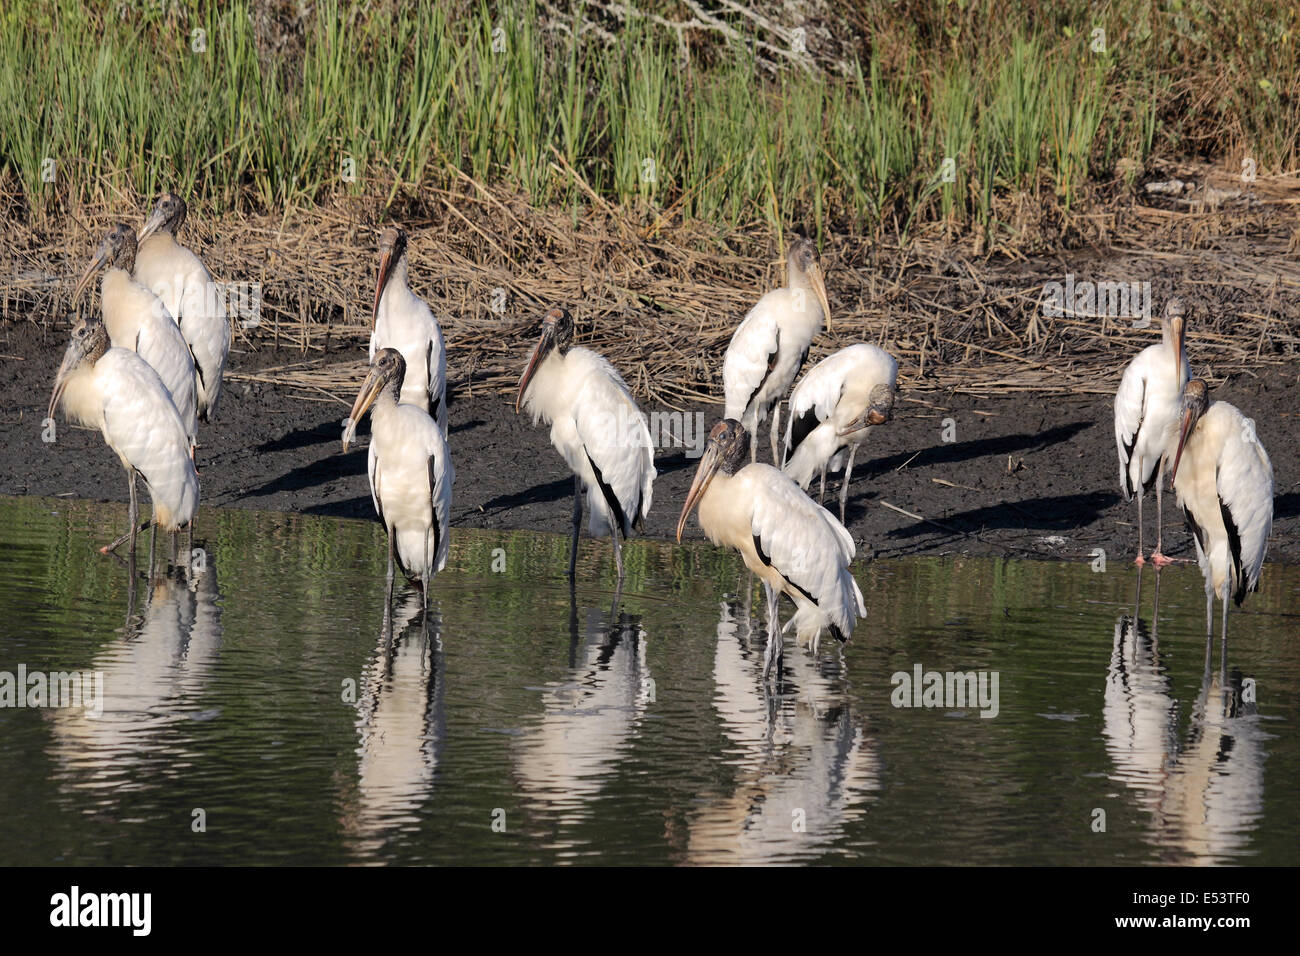 A group of American Wood Storks wade in a coastal wetland Stock Photo